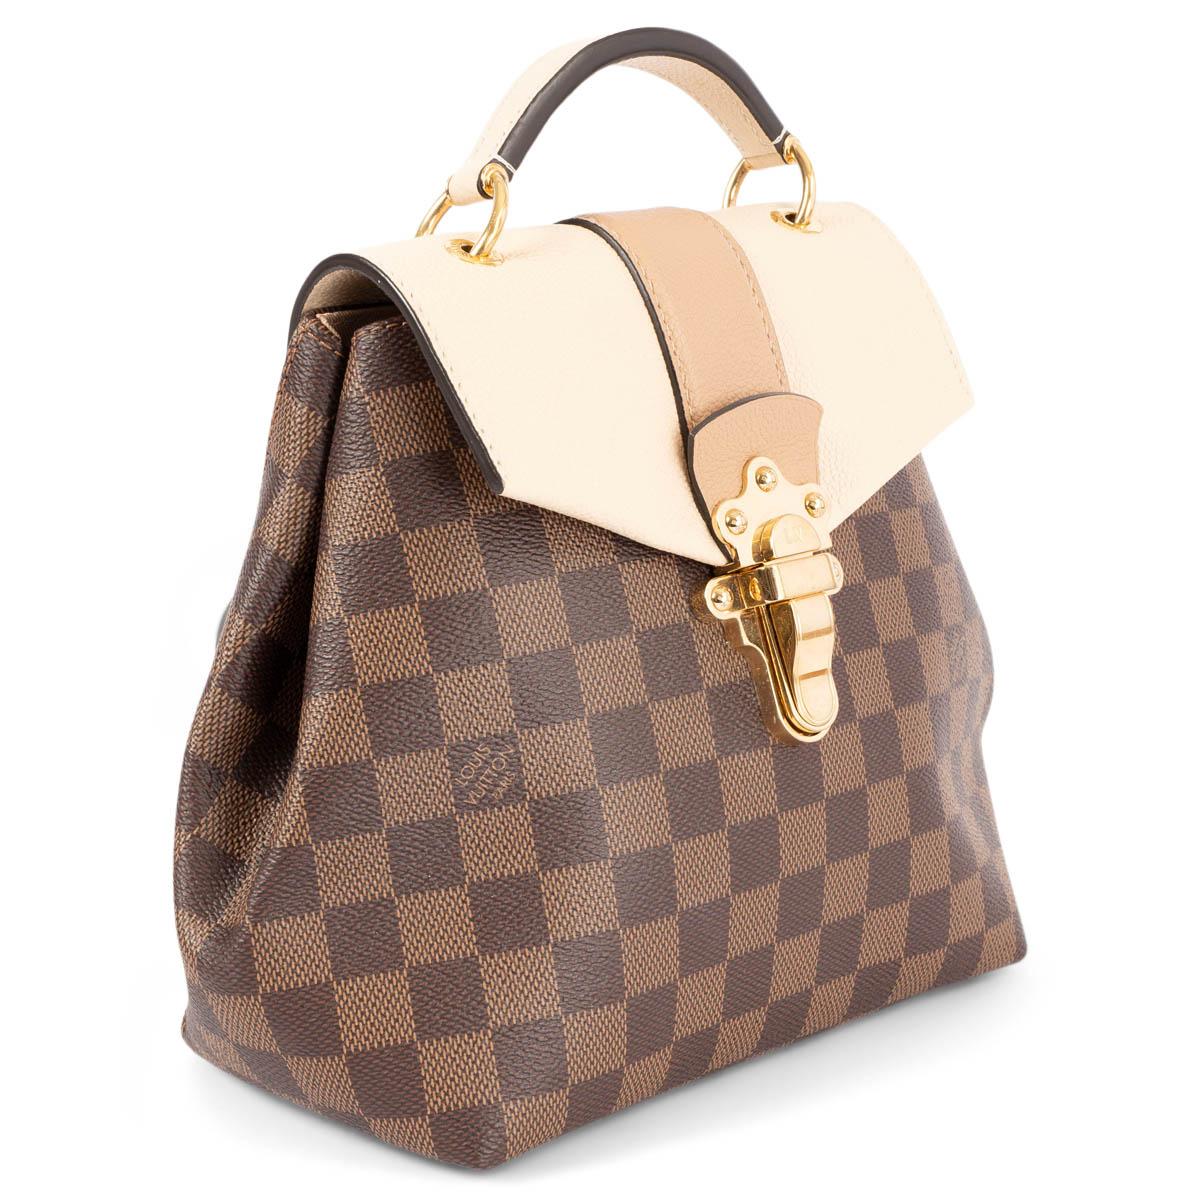 100% authentic Louis Vuitton Clapton backpack in the brand's signature Damier Ebene canvas features a beige and tan grained calfskin leather front flap, a top handle, optional adjustable leather shoulder straps and a polished gold-tone brass LV